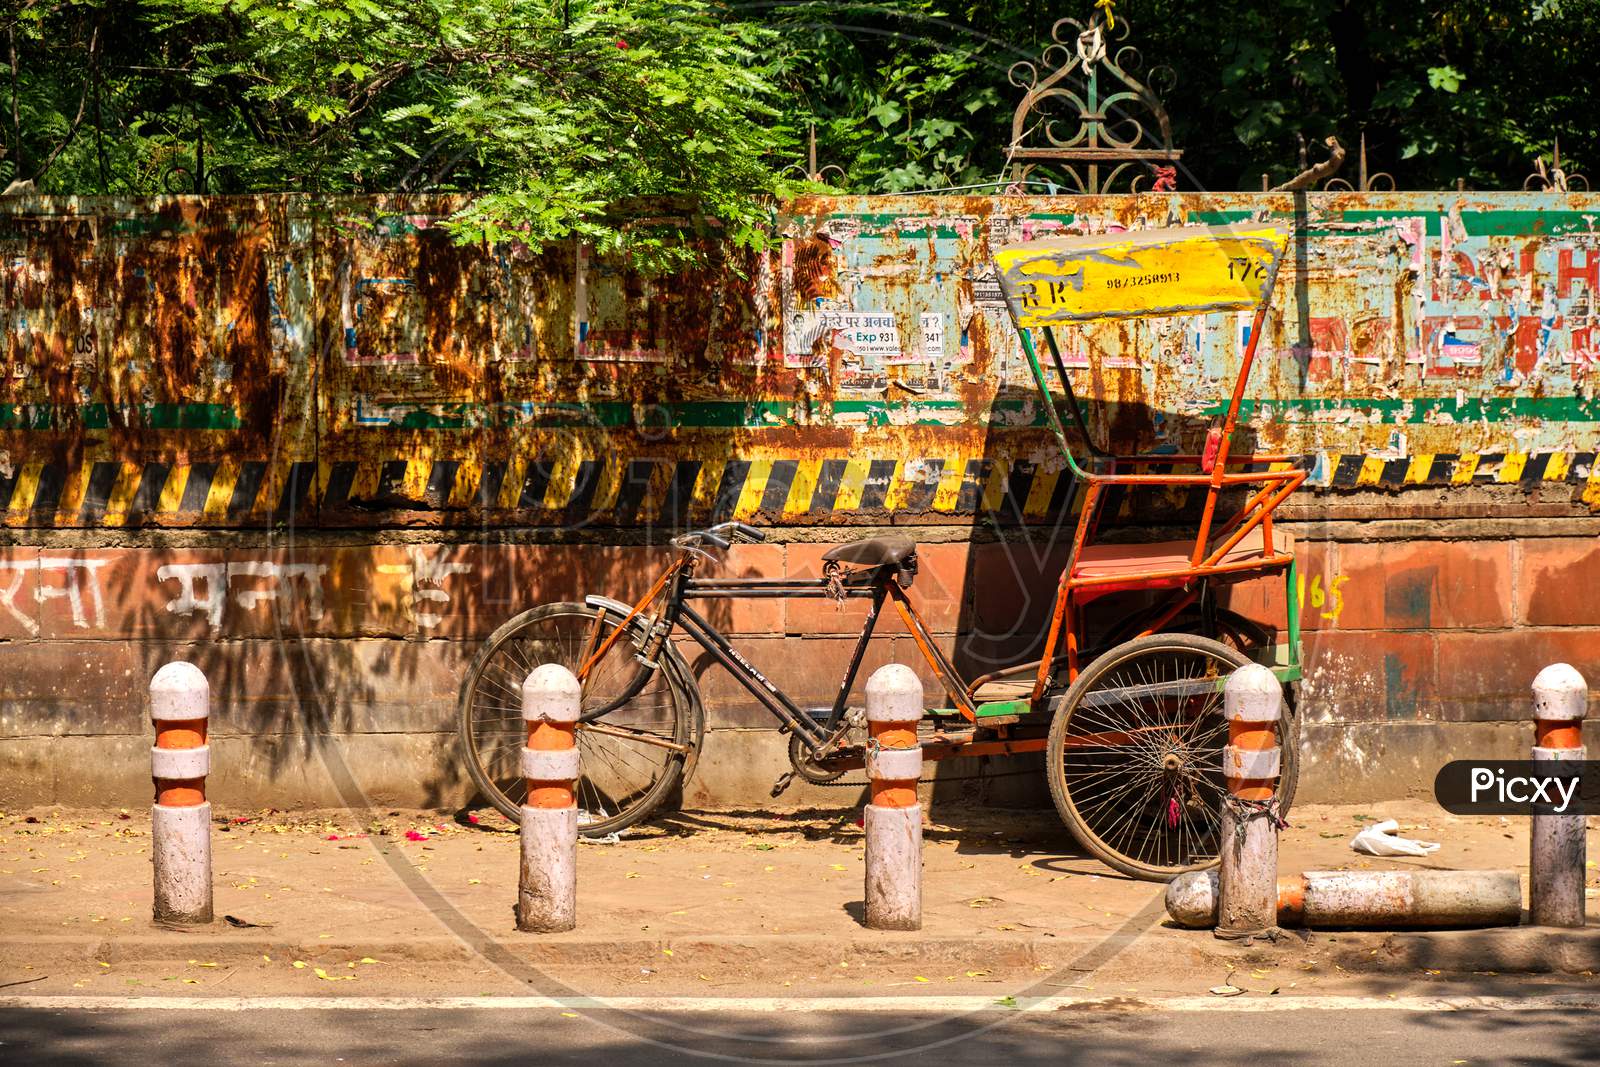 Old Time-Worn Bicycle Rickshaw, Streets Of New Delhi, India